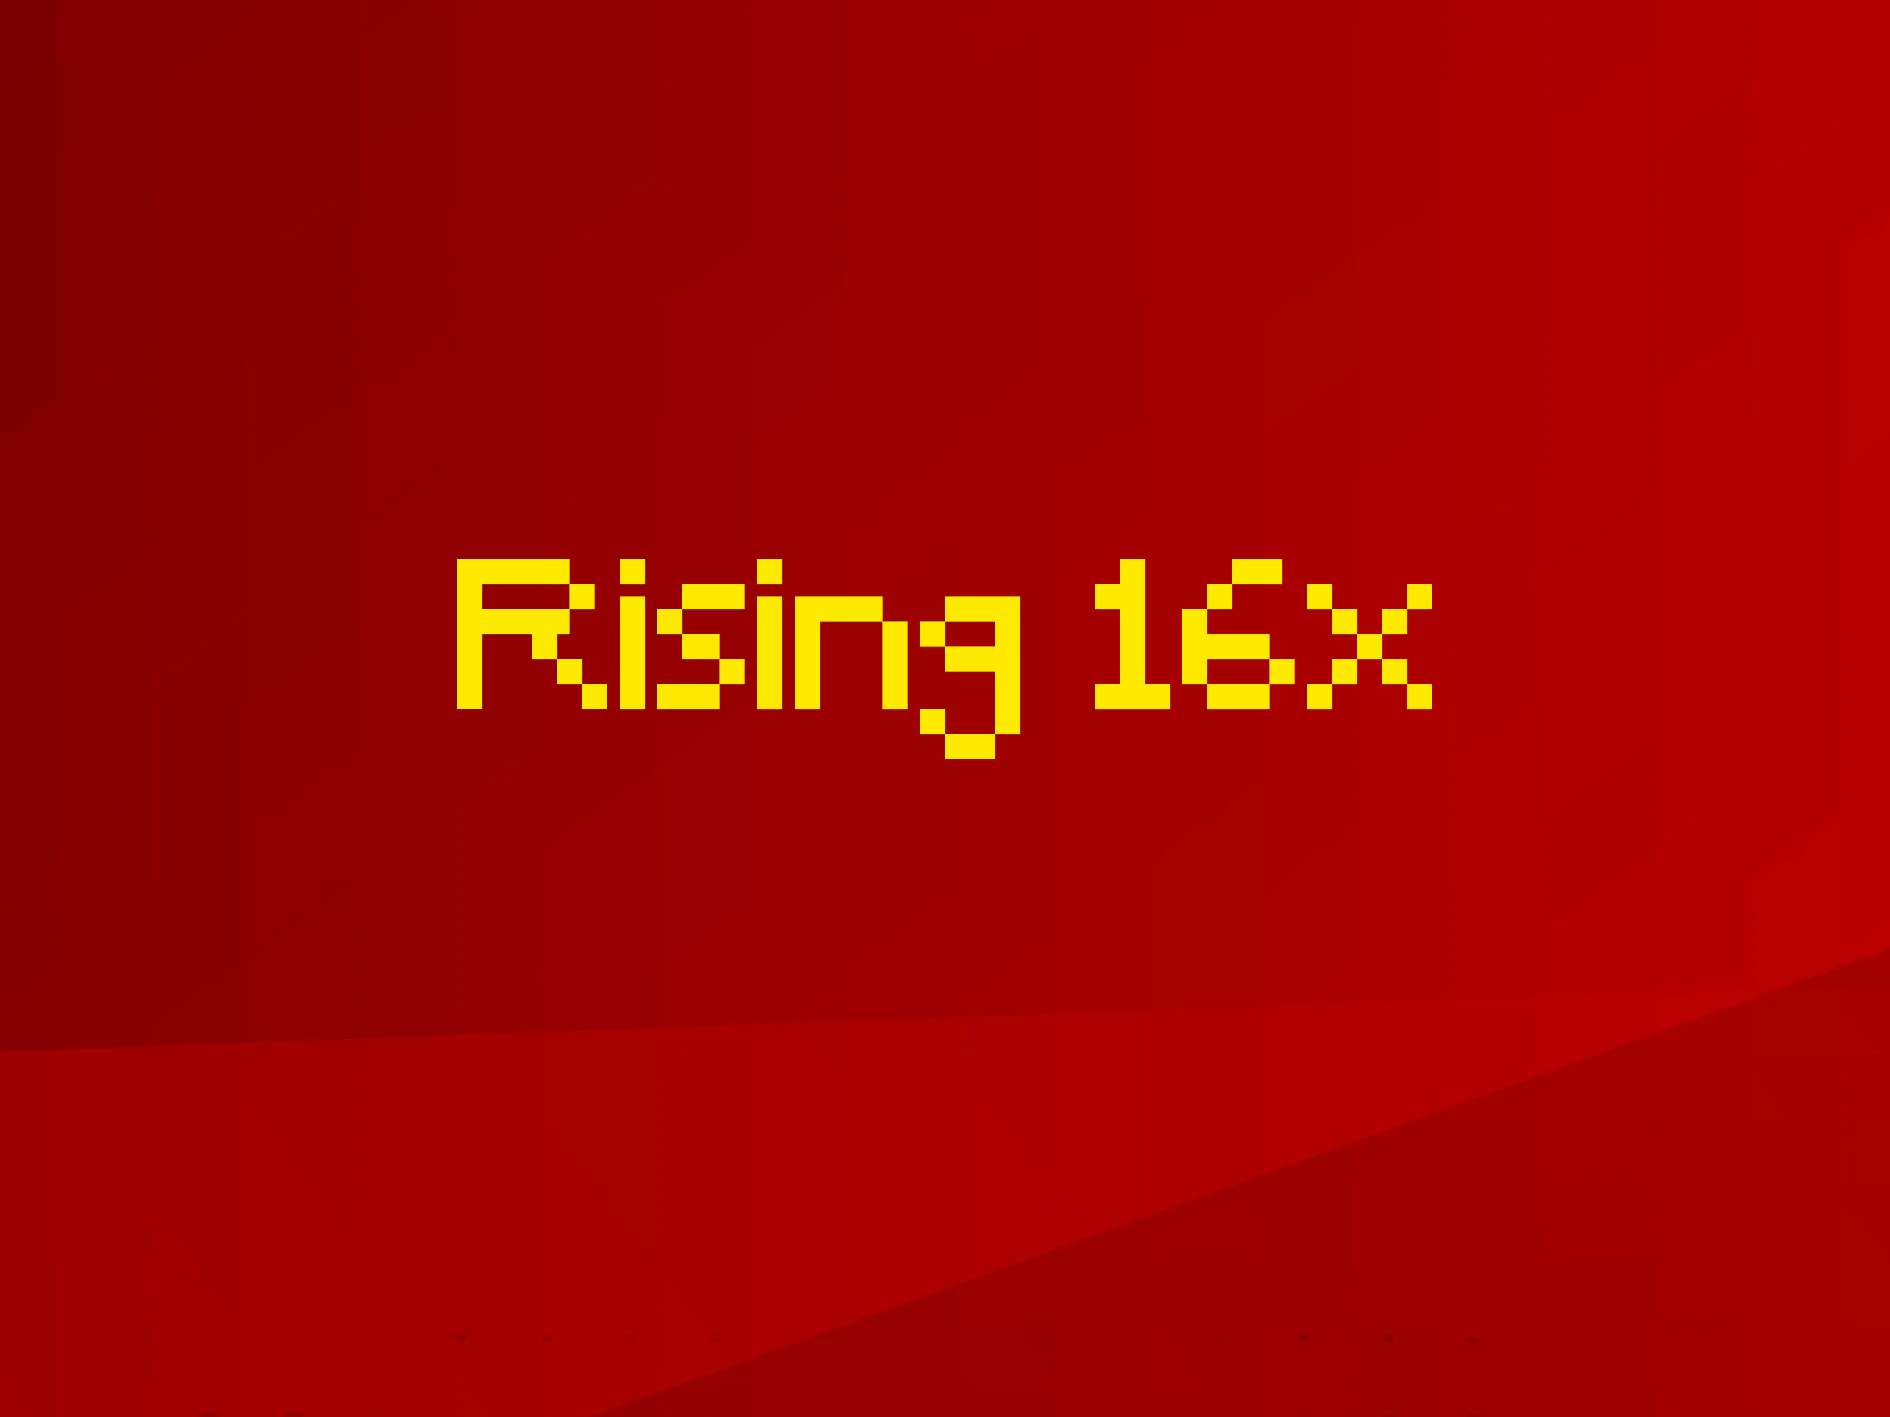 Rising  16x by BeastBlazeInd on PvPRP